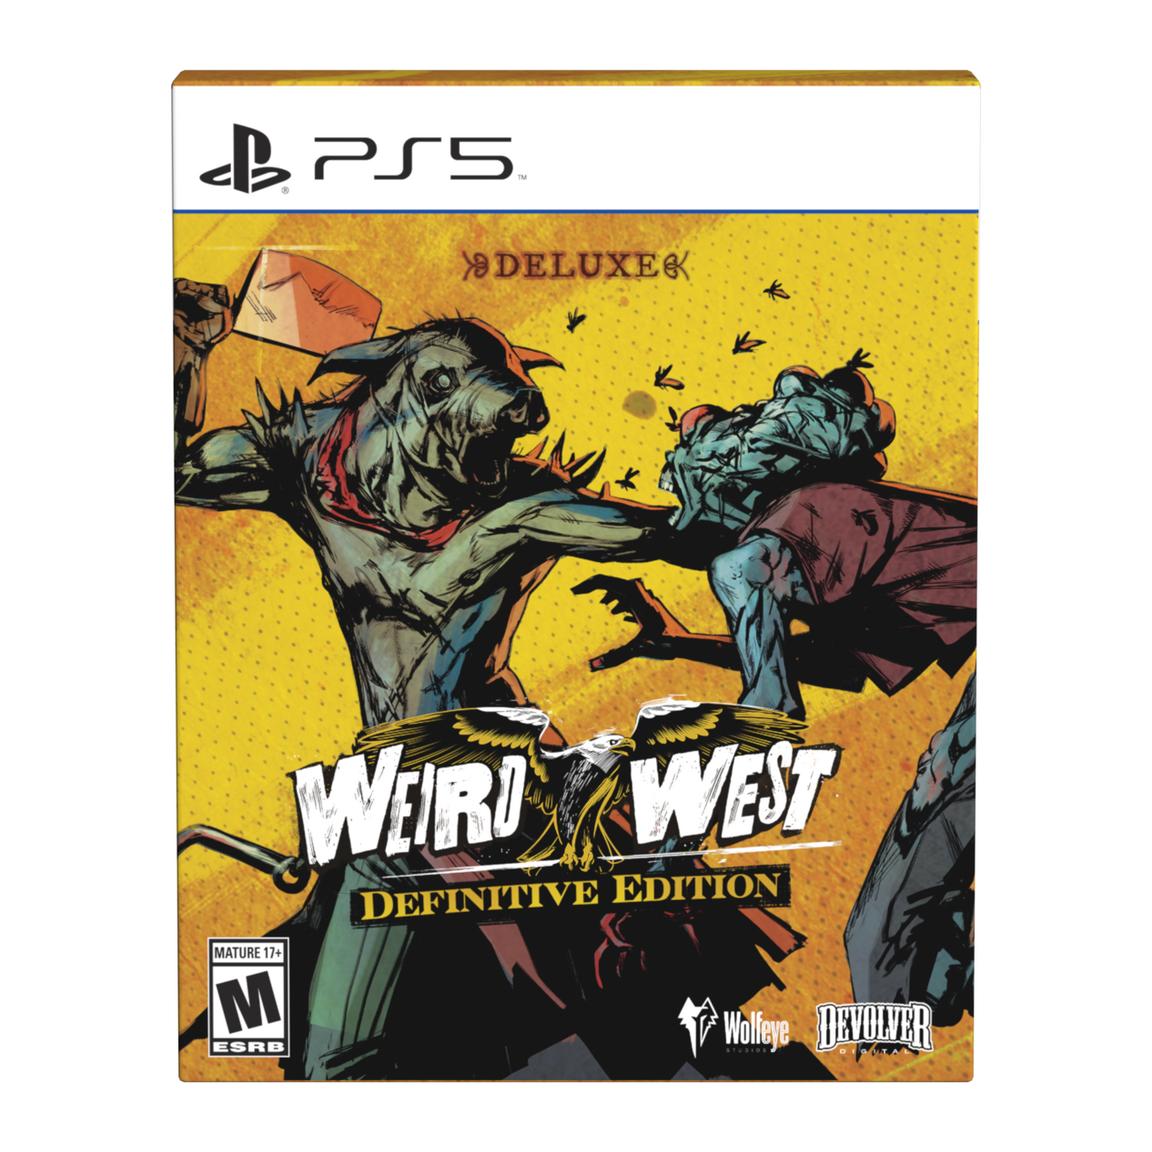 Видеоигра Weird West: Definitive Edition Deluxe - PlayStation 5 dead island riptide definitive edition